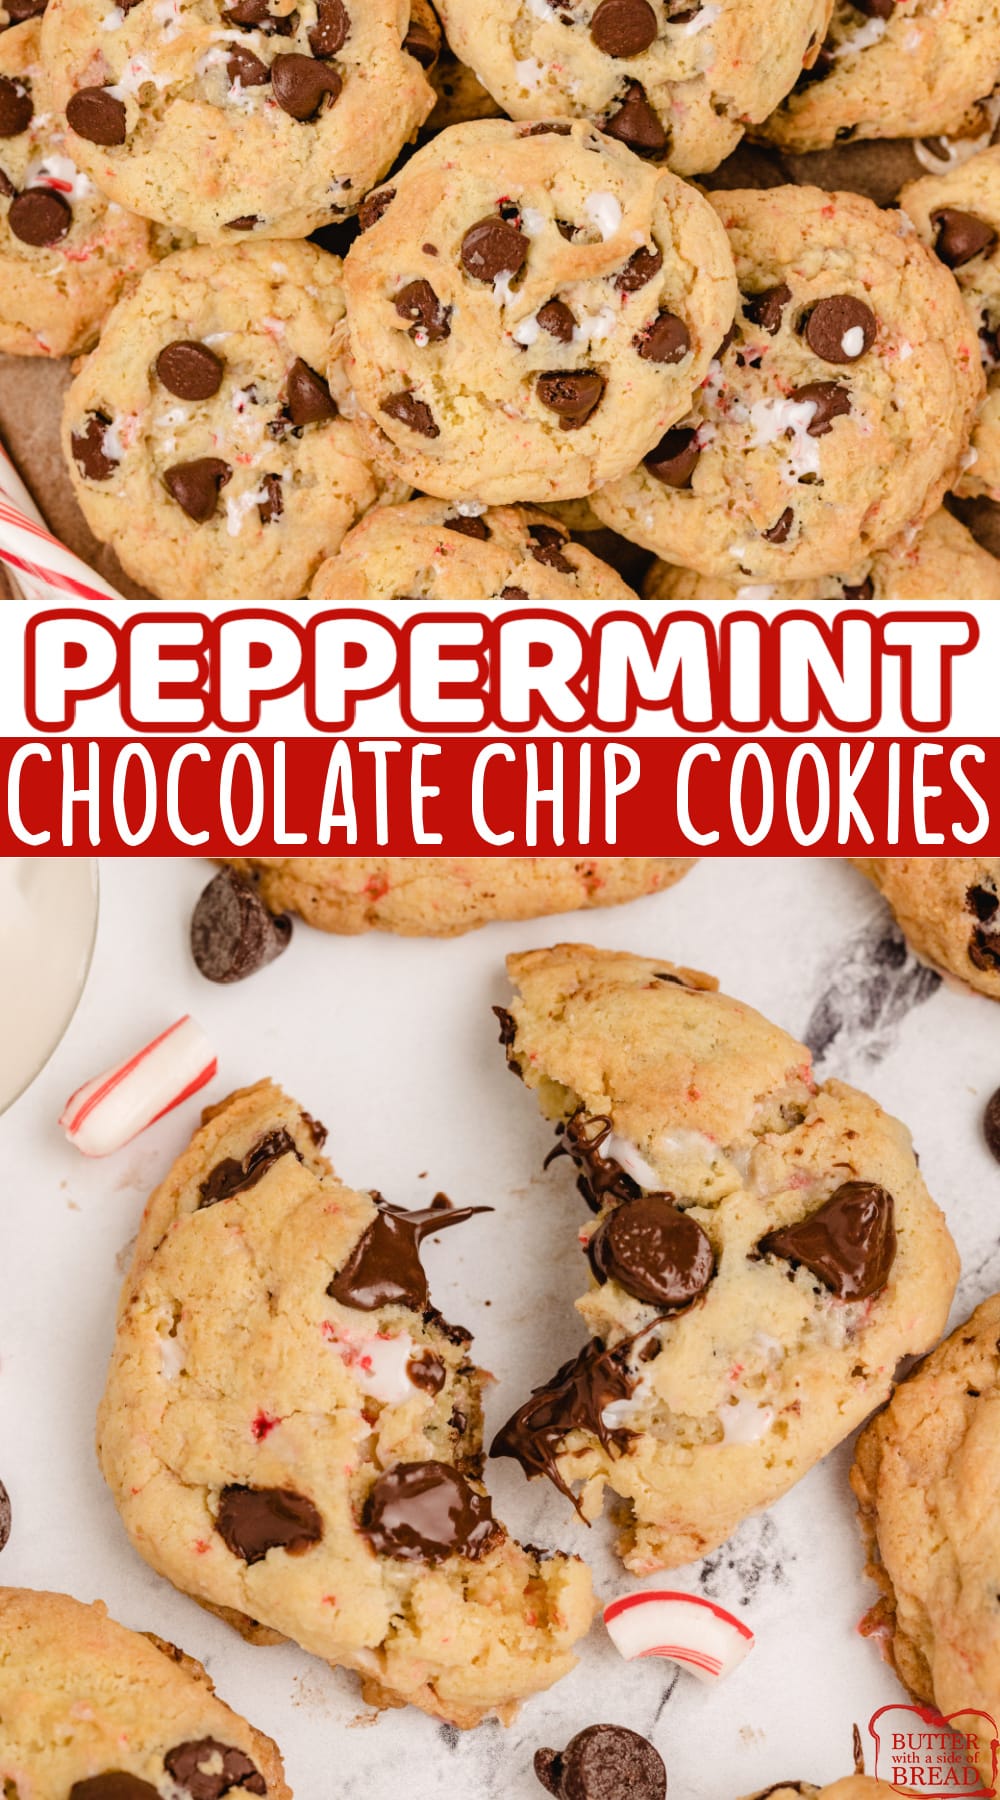 Peppermint Chocolate Chip Cookies are made with crushed candy canes, pudding mix, peppermint extract, and chocolate chips. These soft and chewy cookies are perfect for the holidays!